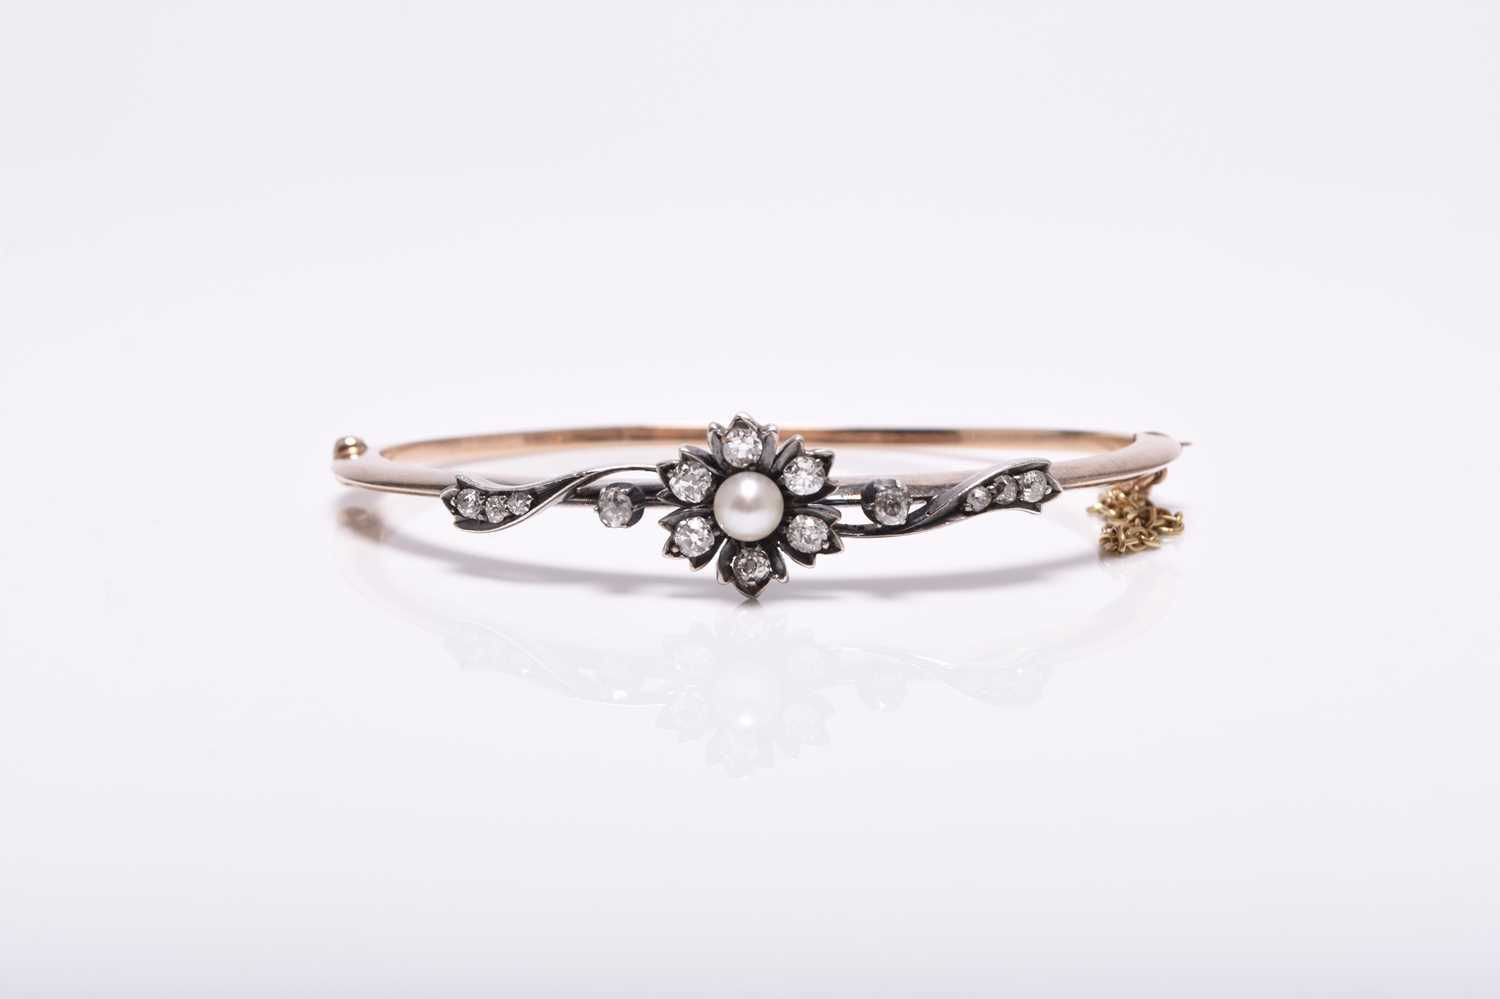 A late 19th / early 20th century diamond and cultured pearl hinged bangle